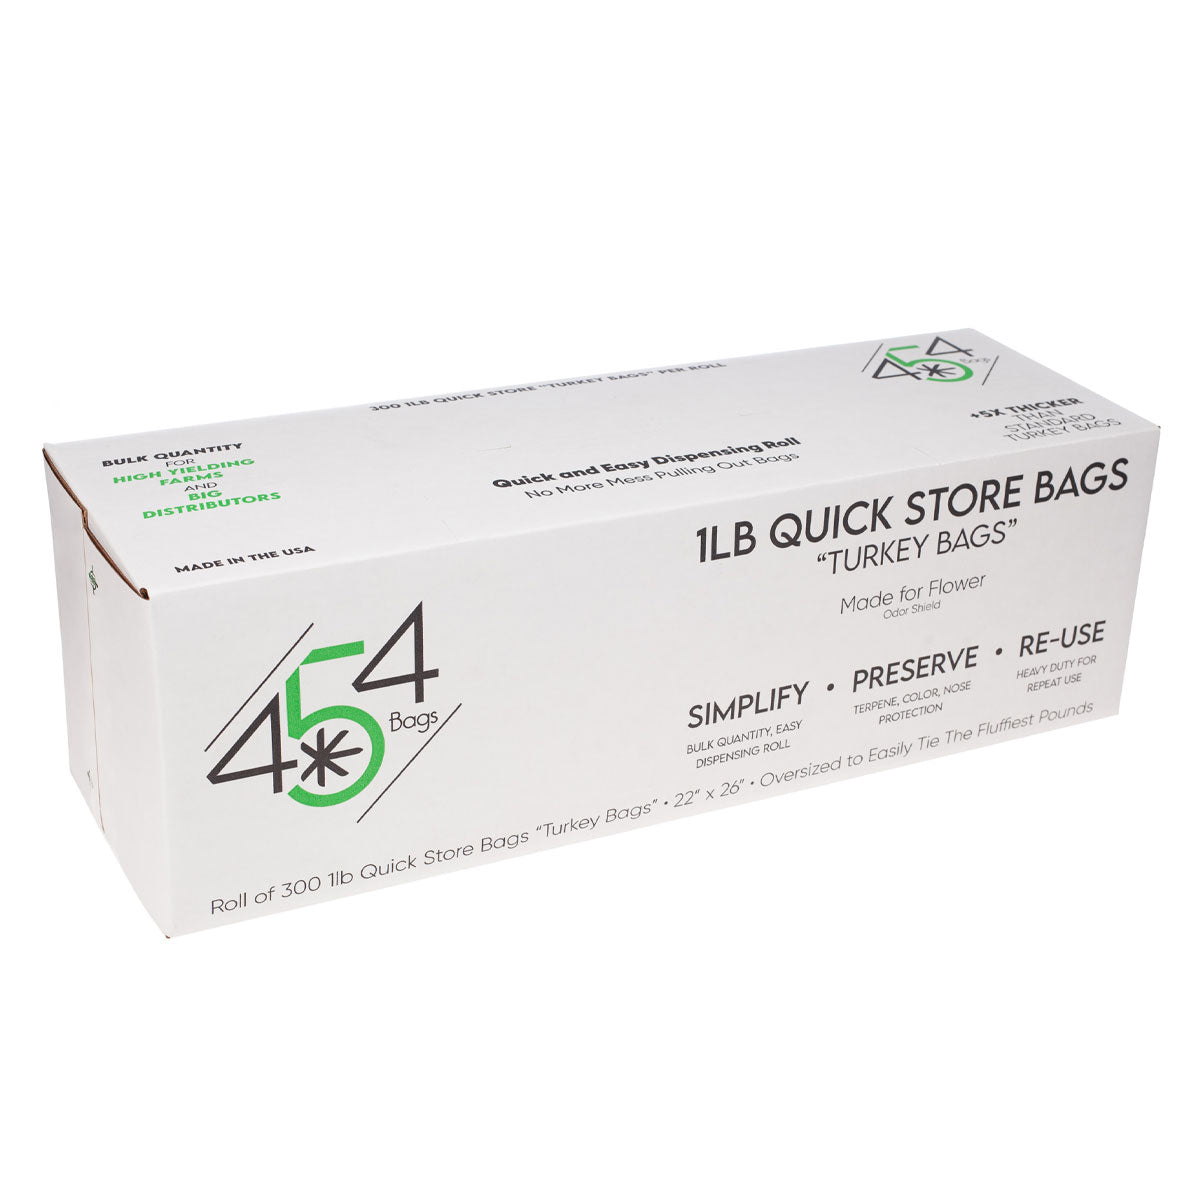 454 Bags Quick Store Bags (Turkey Bags)